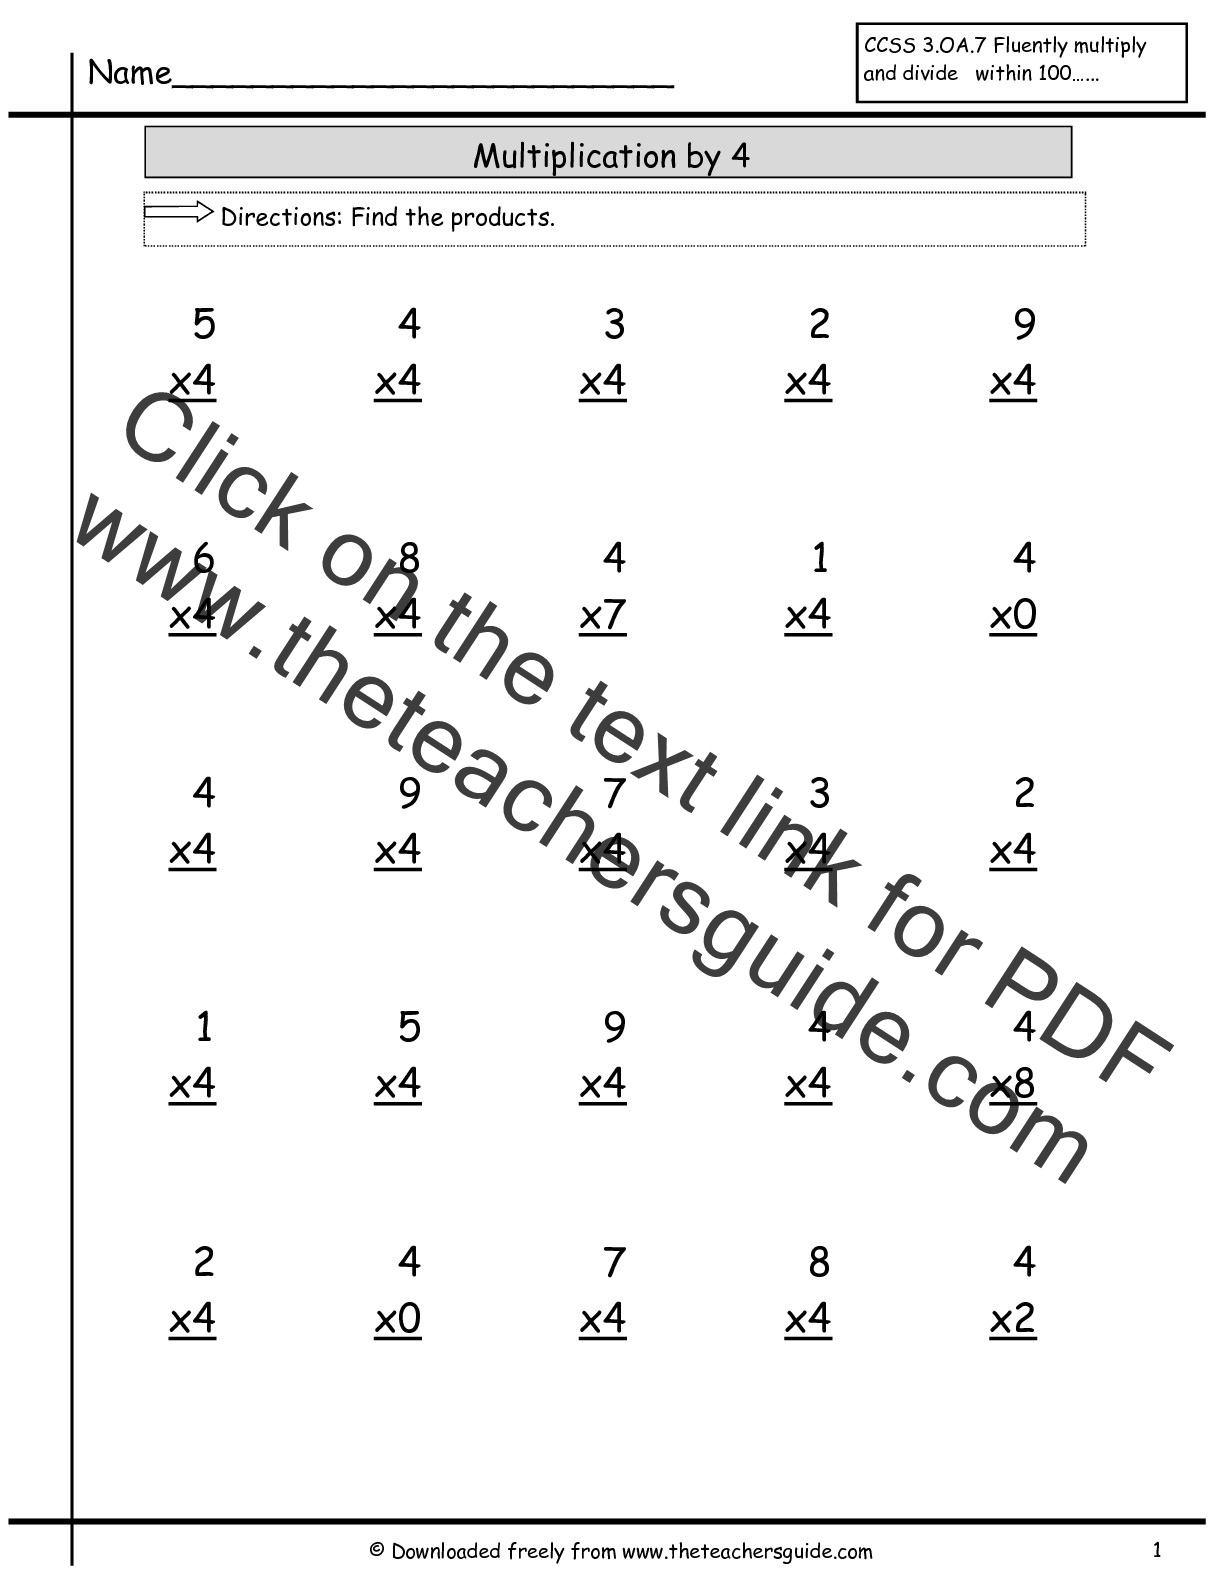 Multiplication Facts Worksheets From The Teacher s Guide